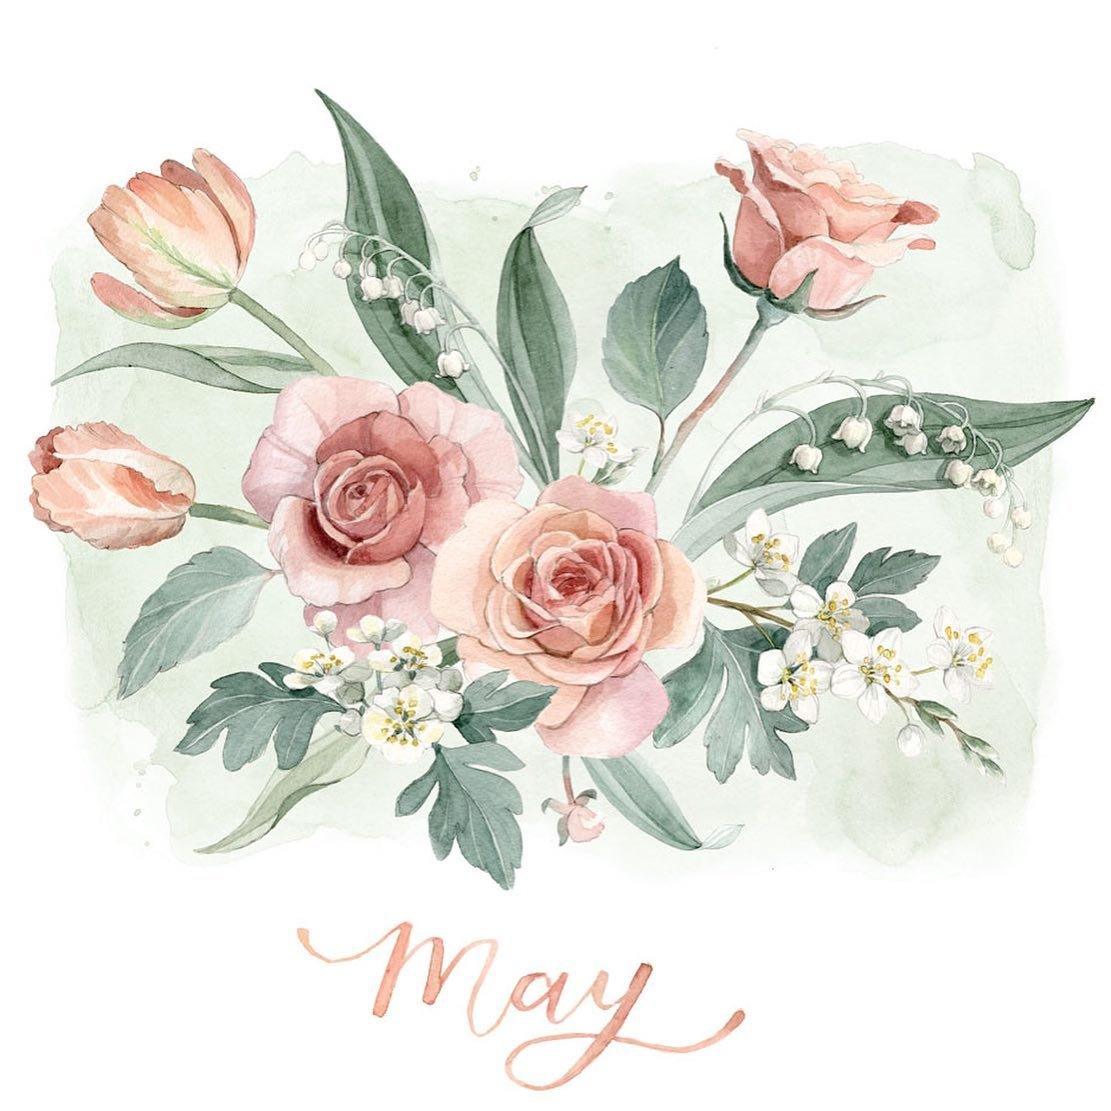 It&rsquo;s May! Each month this year I&rsquo;ll be painting a floral piece including the month&rsquo;s birth flower! May is lily of the valley and hawthorn, and I paired them with pink tulips and roses (by request from Sue S - happy birthday!)

I&rsq